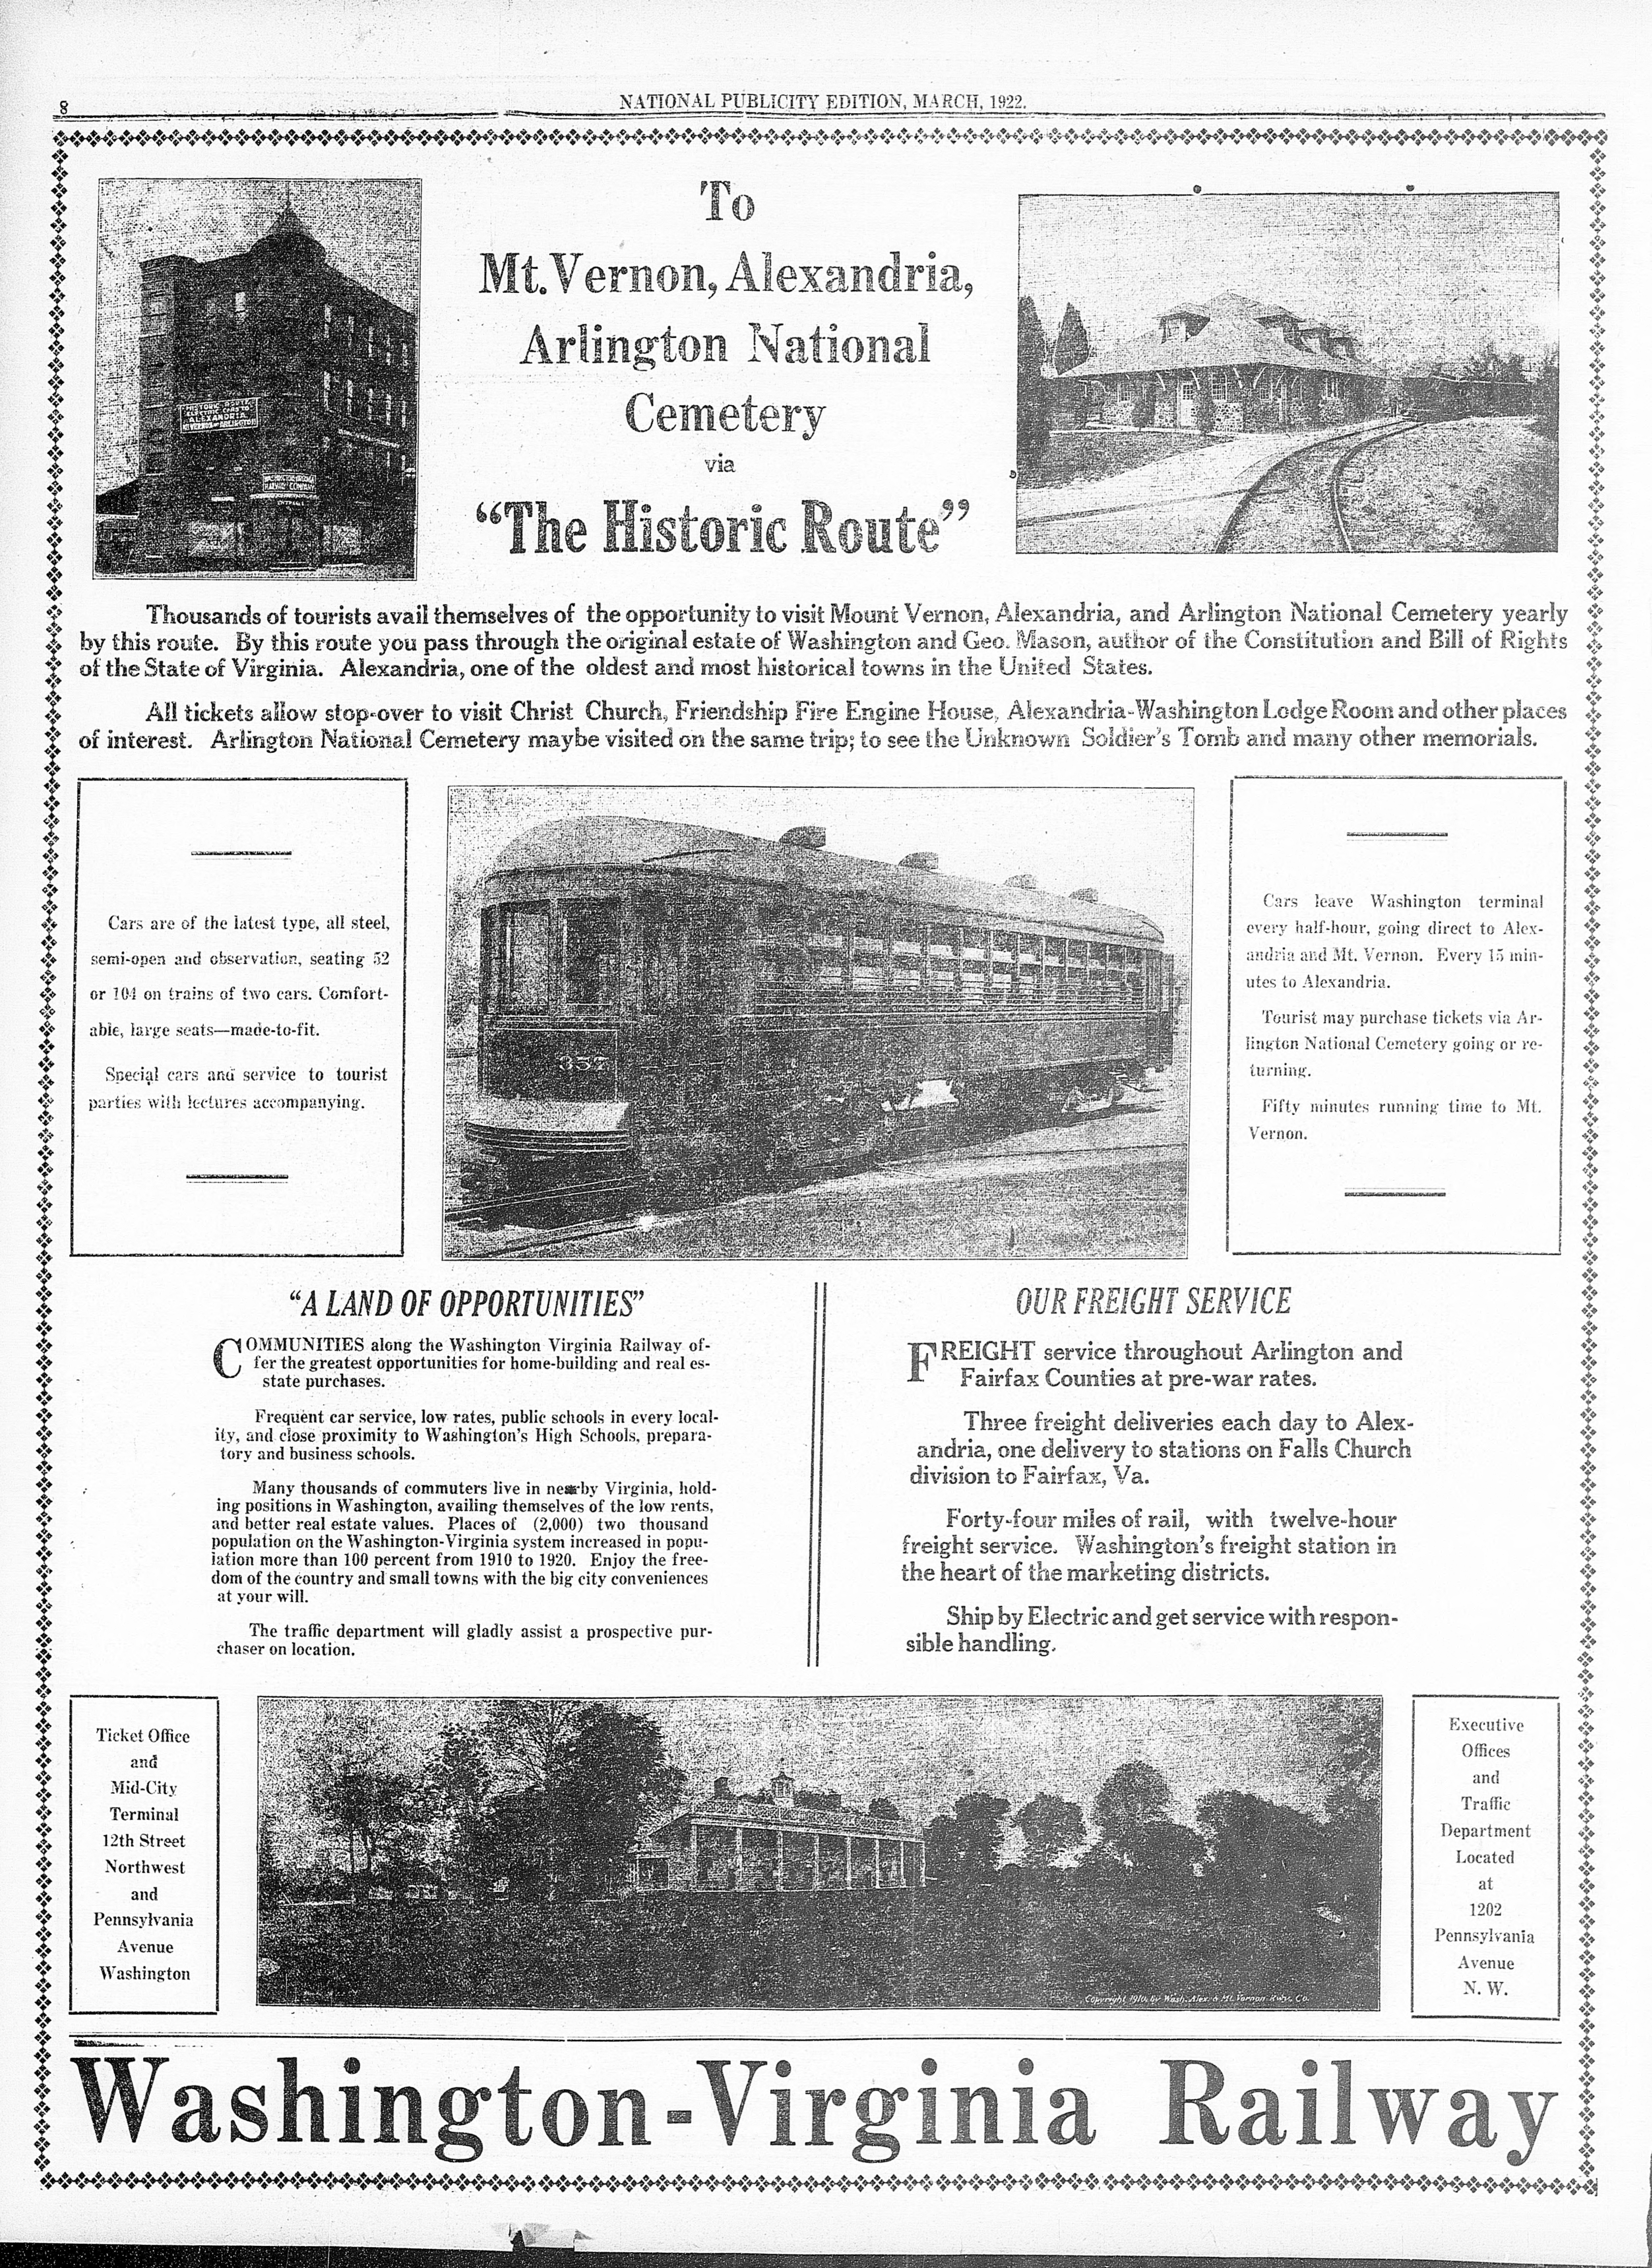 Black and white image of an antique Washington Virginia Railway Company advertisement. The ad depicts a train and highlights the railway's passenger and freight services in Arlington County, Virginia in the early 1920s.